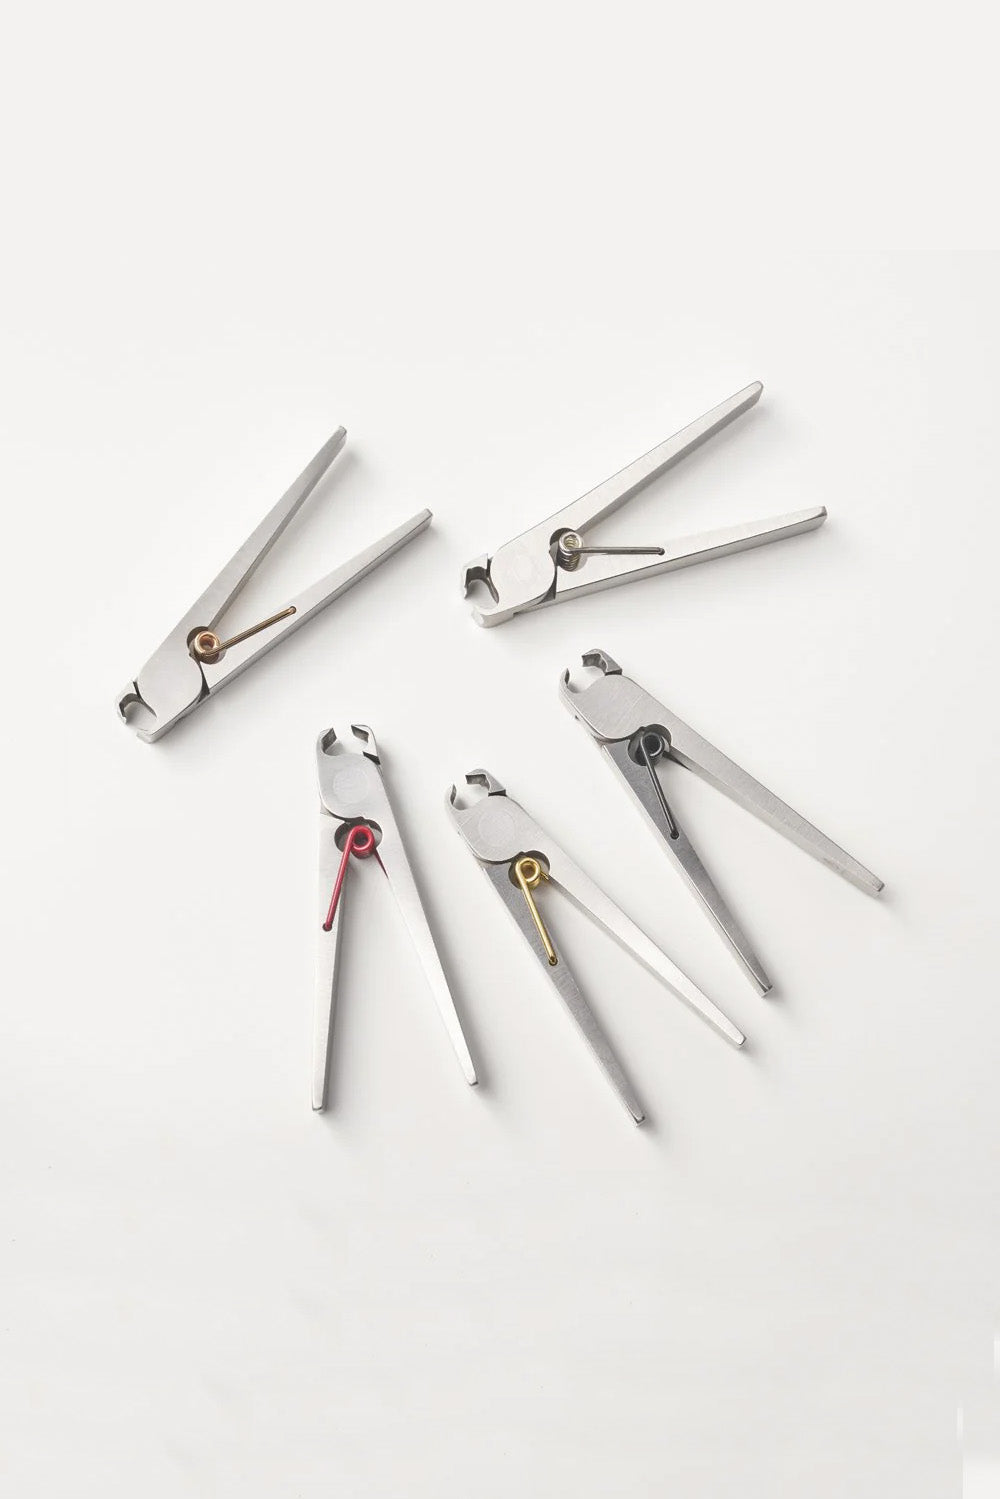 Stainless Steel Nail Cuticle Nipper at Rs 80/piece | Shyam Bazar | Howrah |  ID: 2850455400362